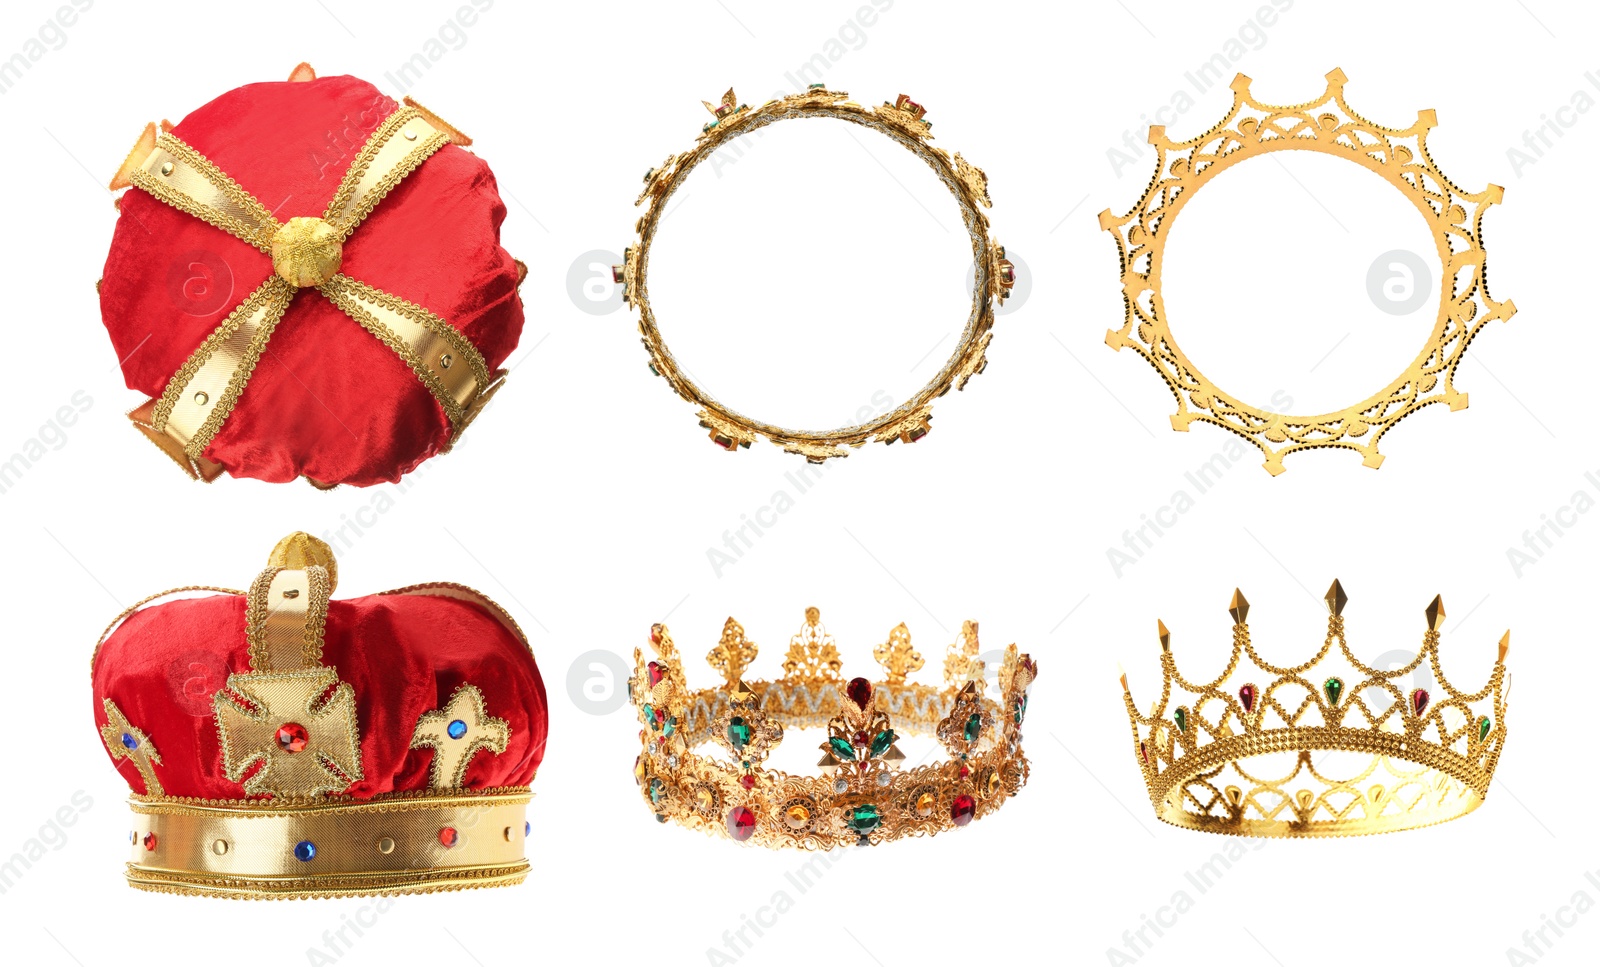 Image of Set of crowns with gemstones on white background, side and top views